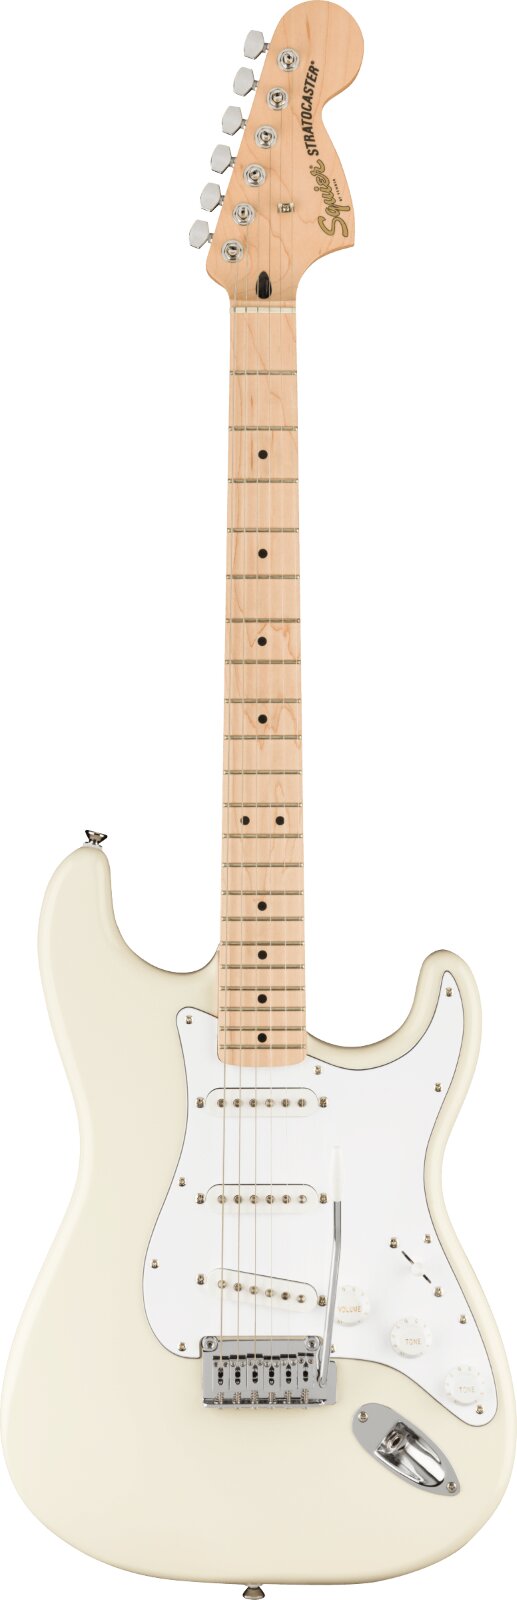 Squier Affinity Series Stratocaster, Maple Fingerboard, White Pickguard, Olympic White : photo 1